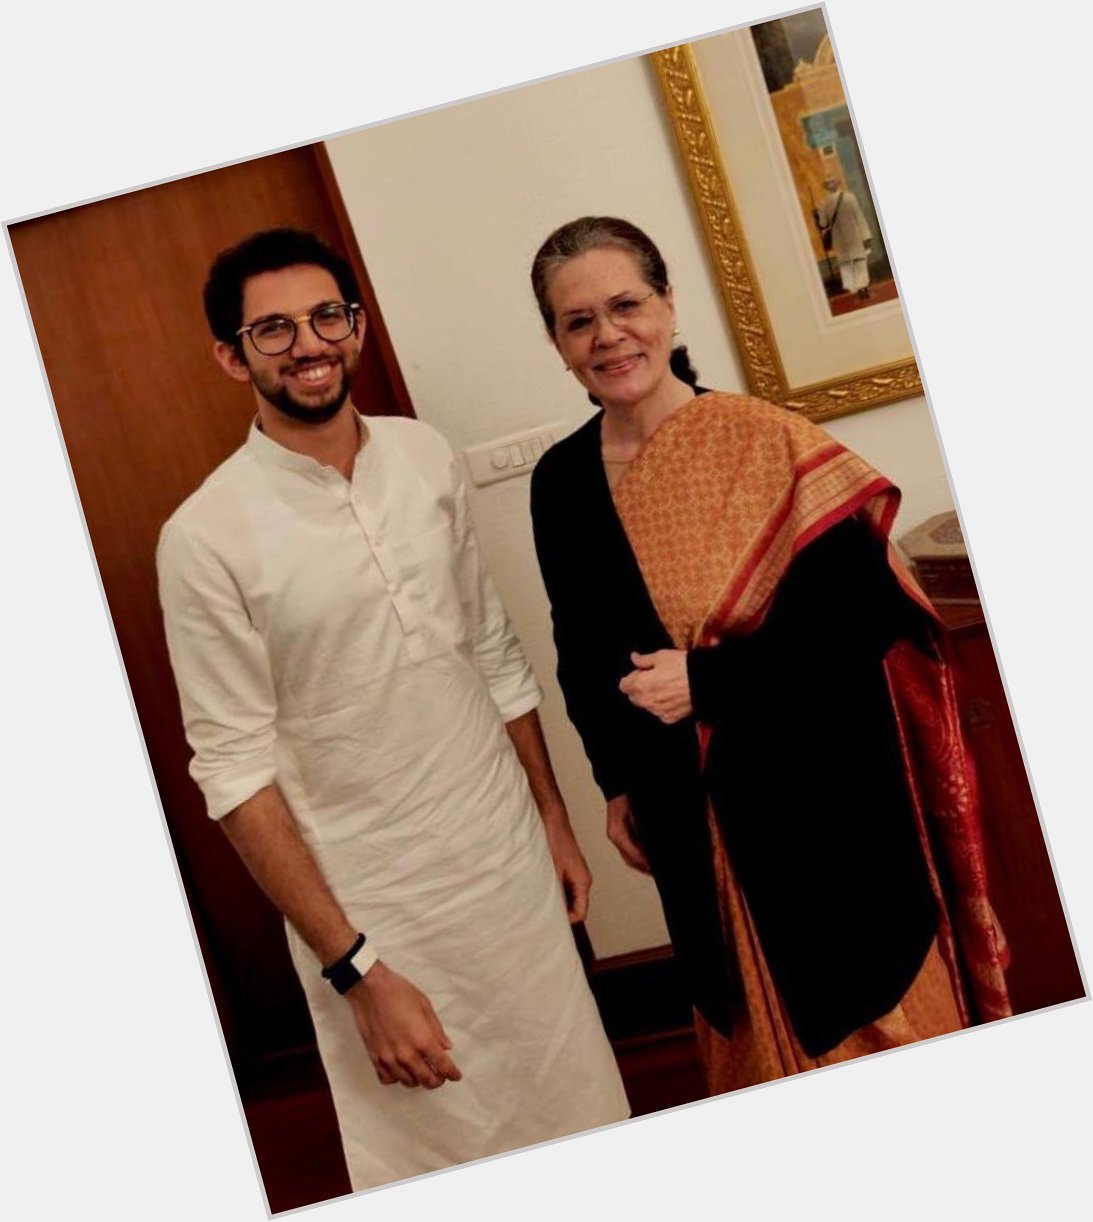 Wishing Mrs. Sonia Gandhi ji a very happy birthday. Wishing her good health and luck in the years to come. 